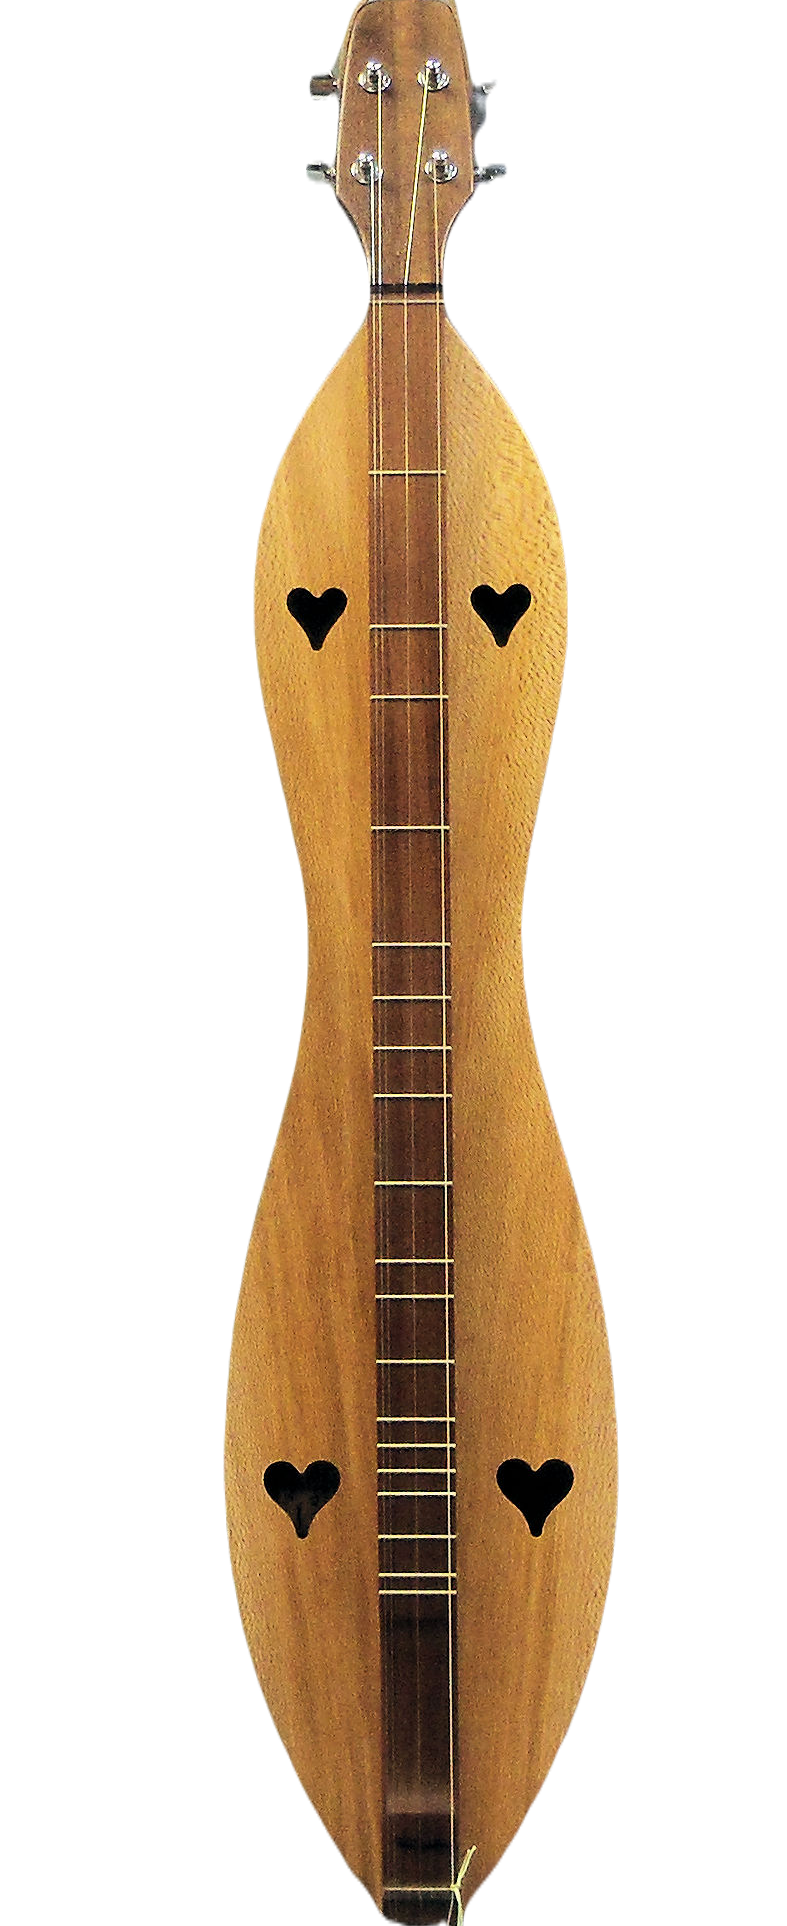 4 String, Flathead, Hourglass with Walnut back, sides and Spalted, Clear or Quartersawn Sycamore top (4FHWSY)